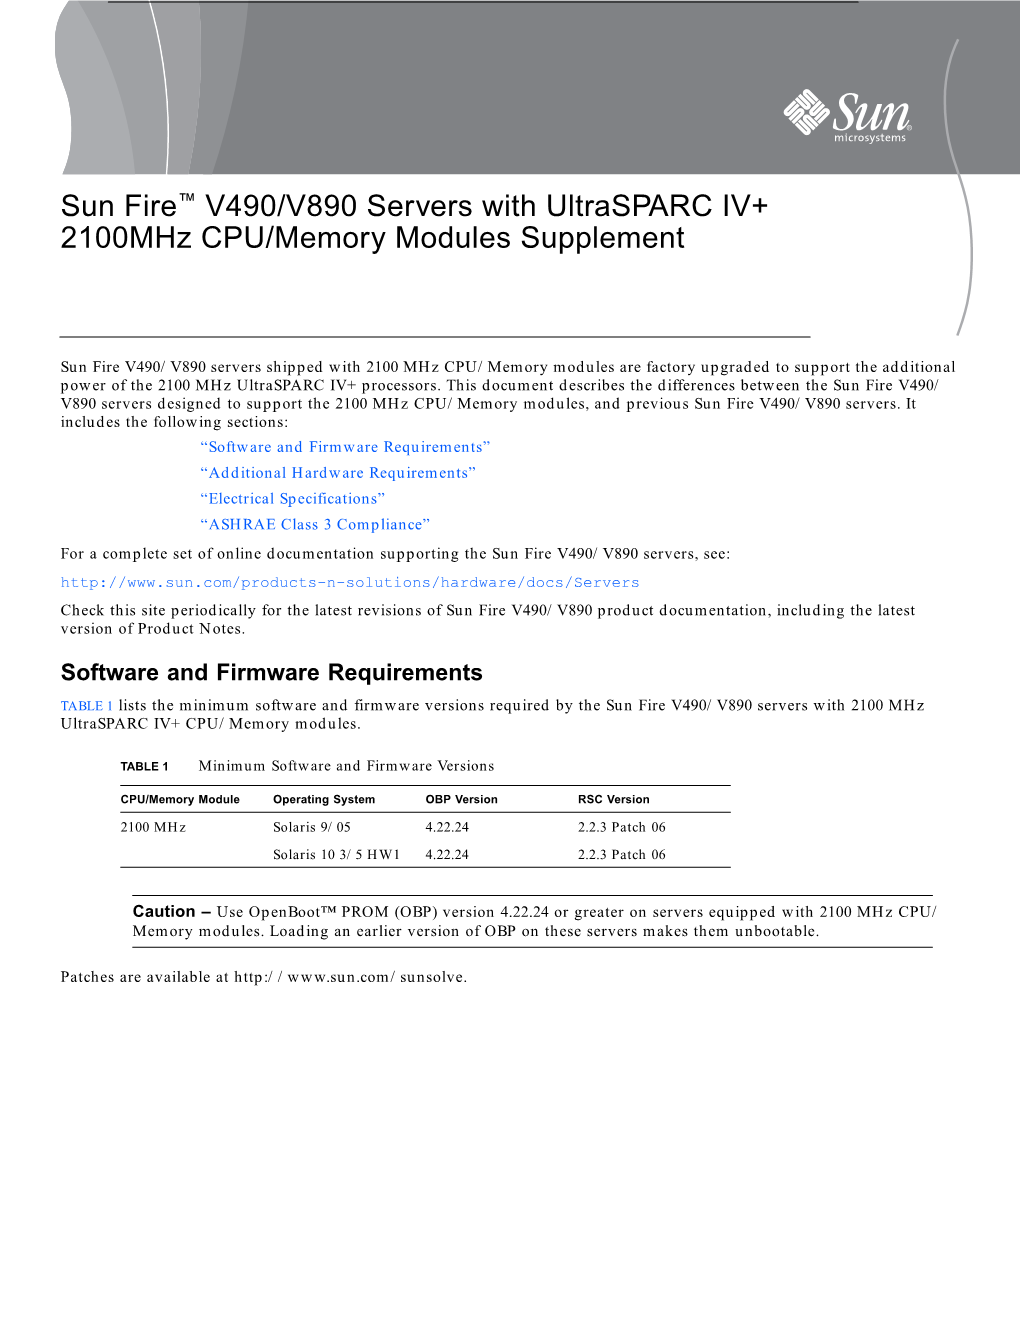 Sun Fire V490/V890 Servers with 2100Mhz CPU/Memory Modules Supplement